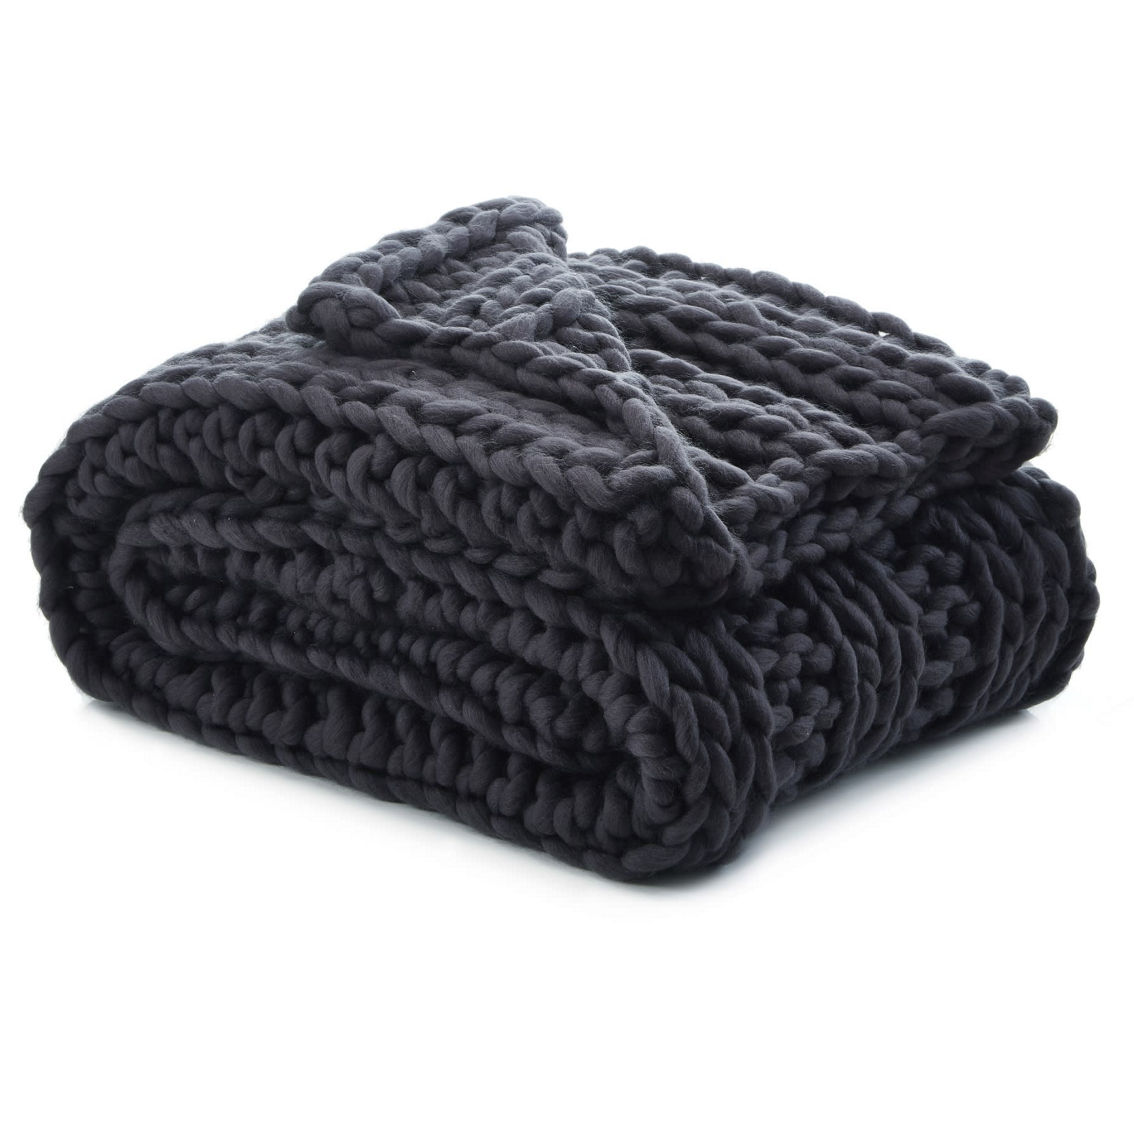 Cozy Tyme Keon Channel Knit Throw - Image 3 of 5